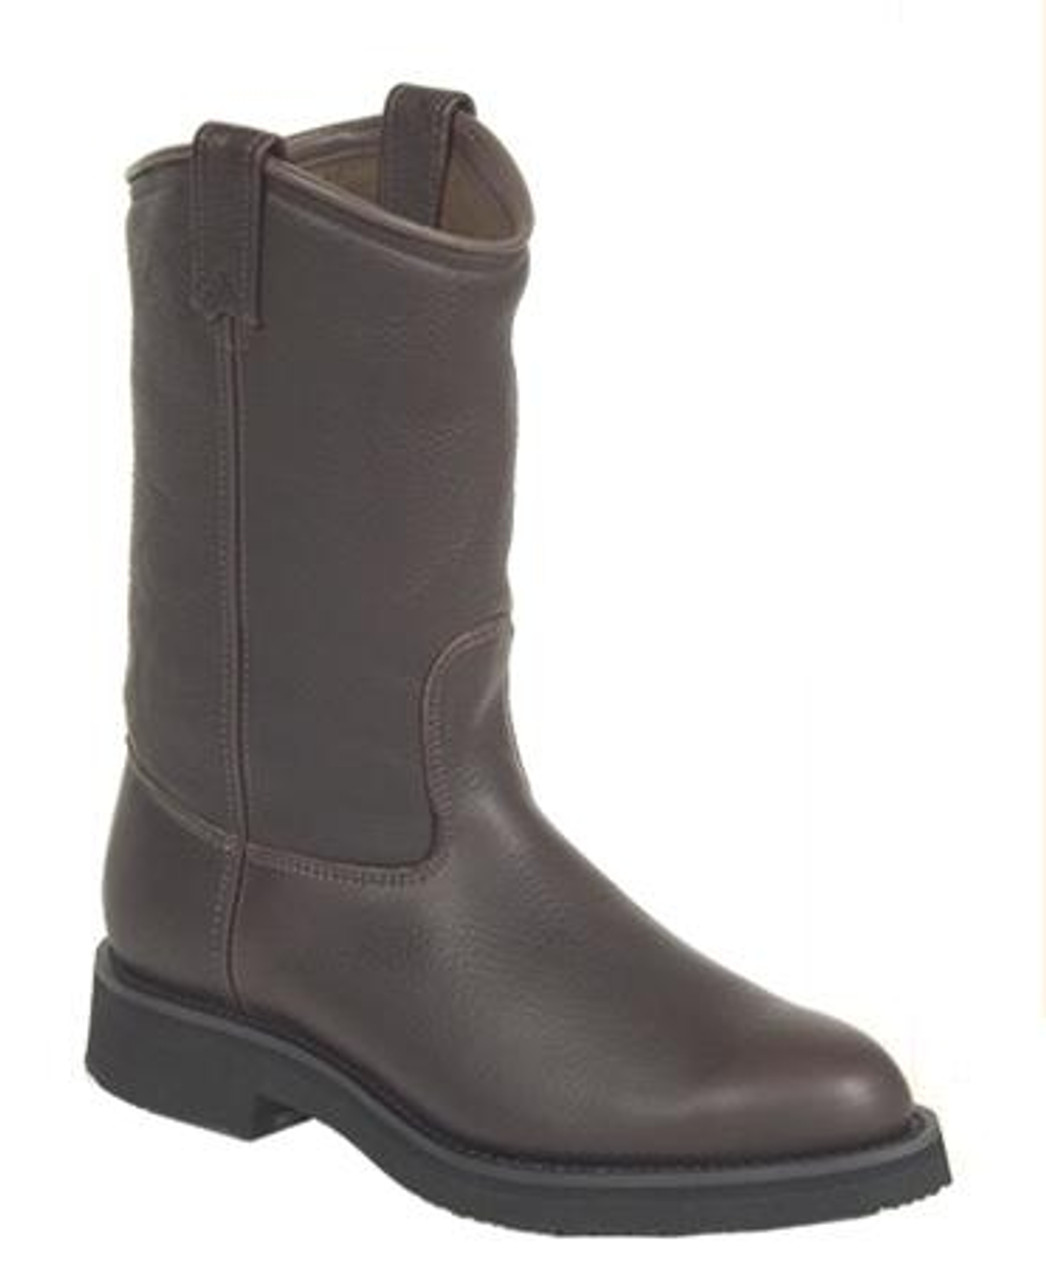 Canada West Men's Lined Pull-On Roper 